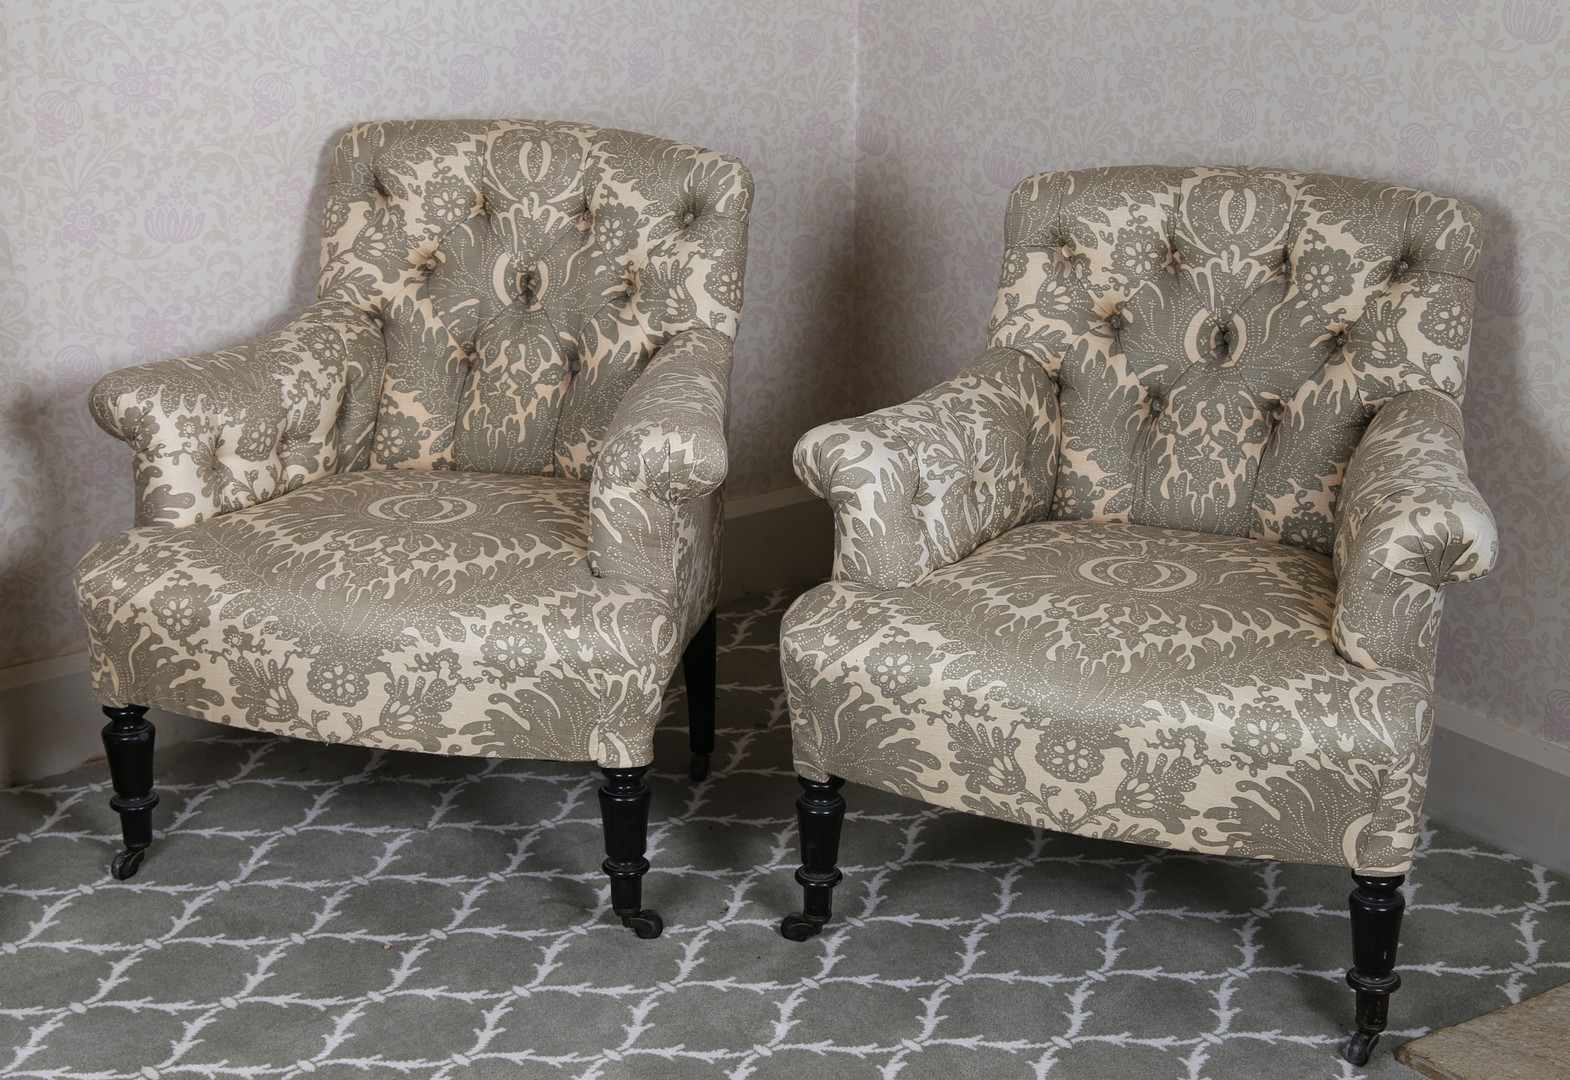 A PAIR OF LATE VICTORIAN LOW ARMCHAIRS.